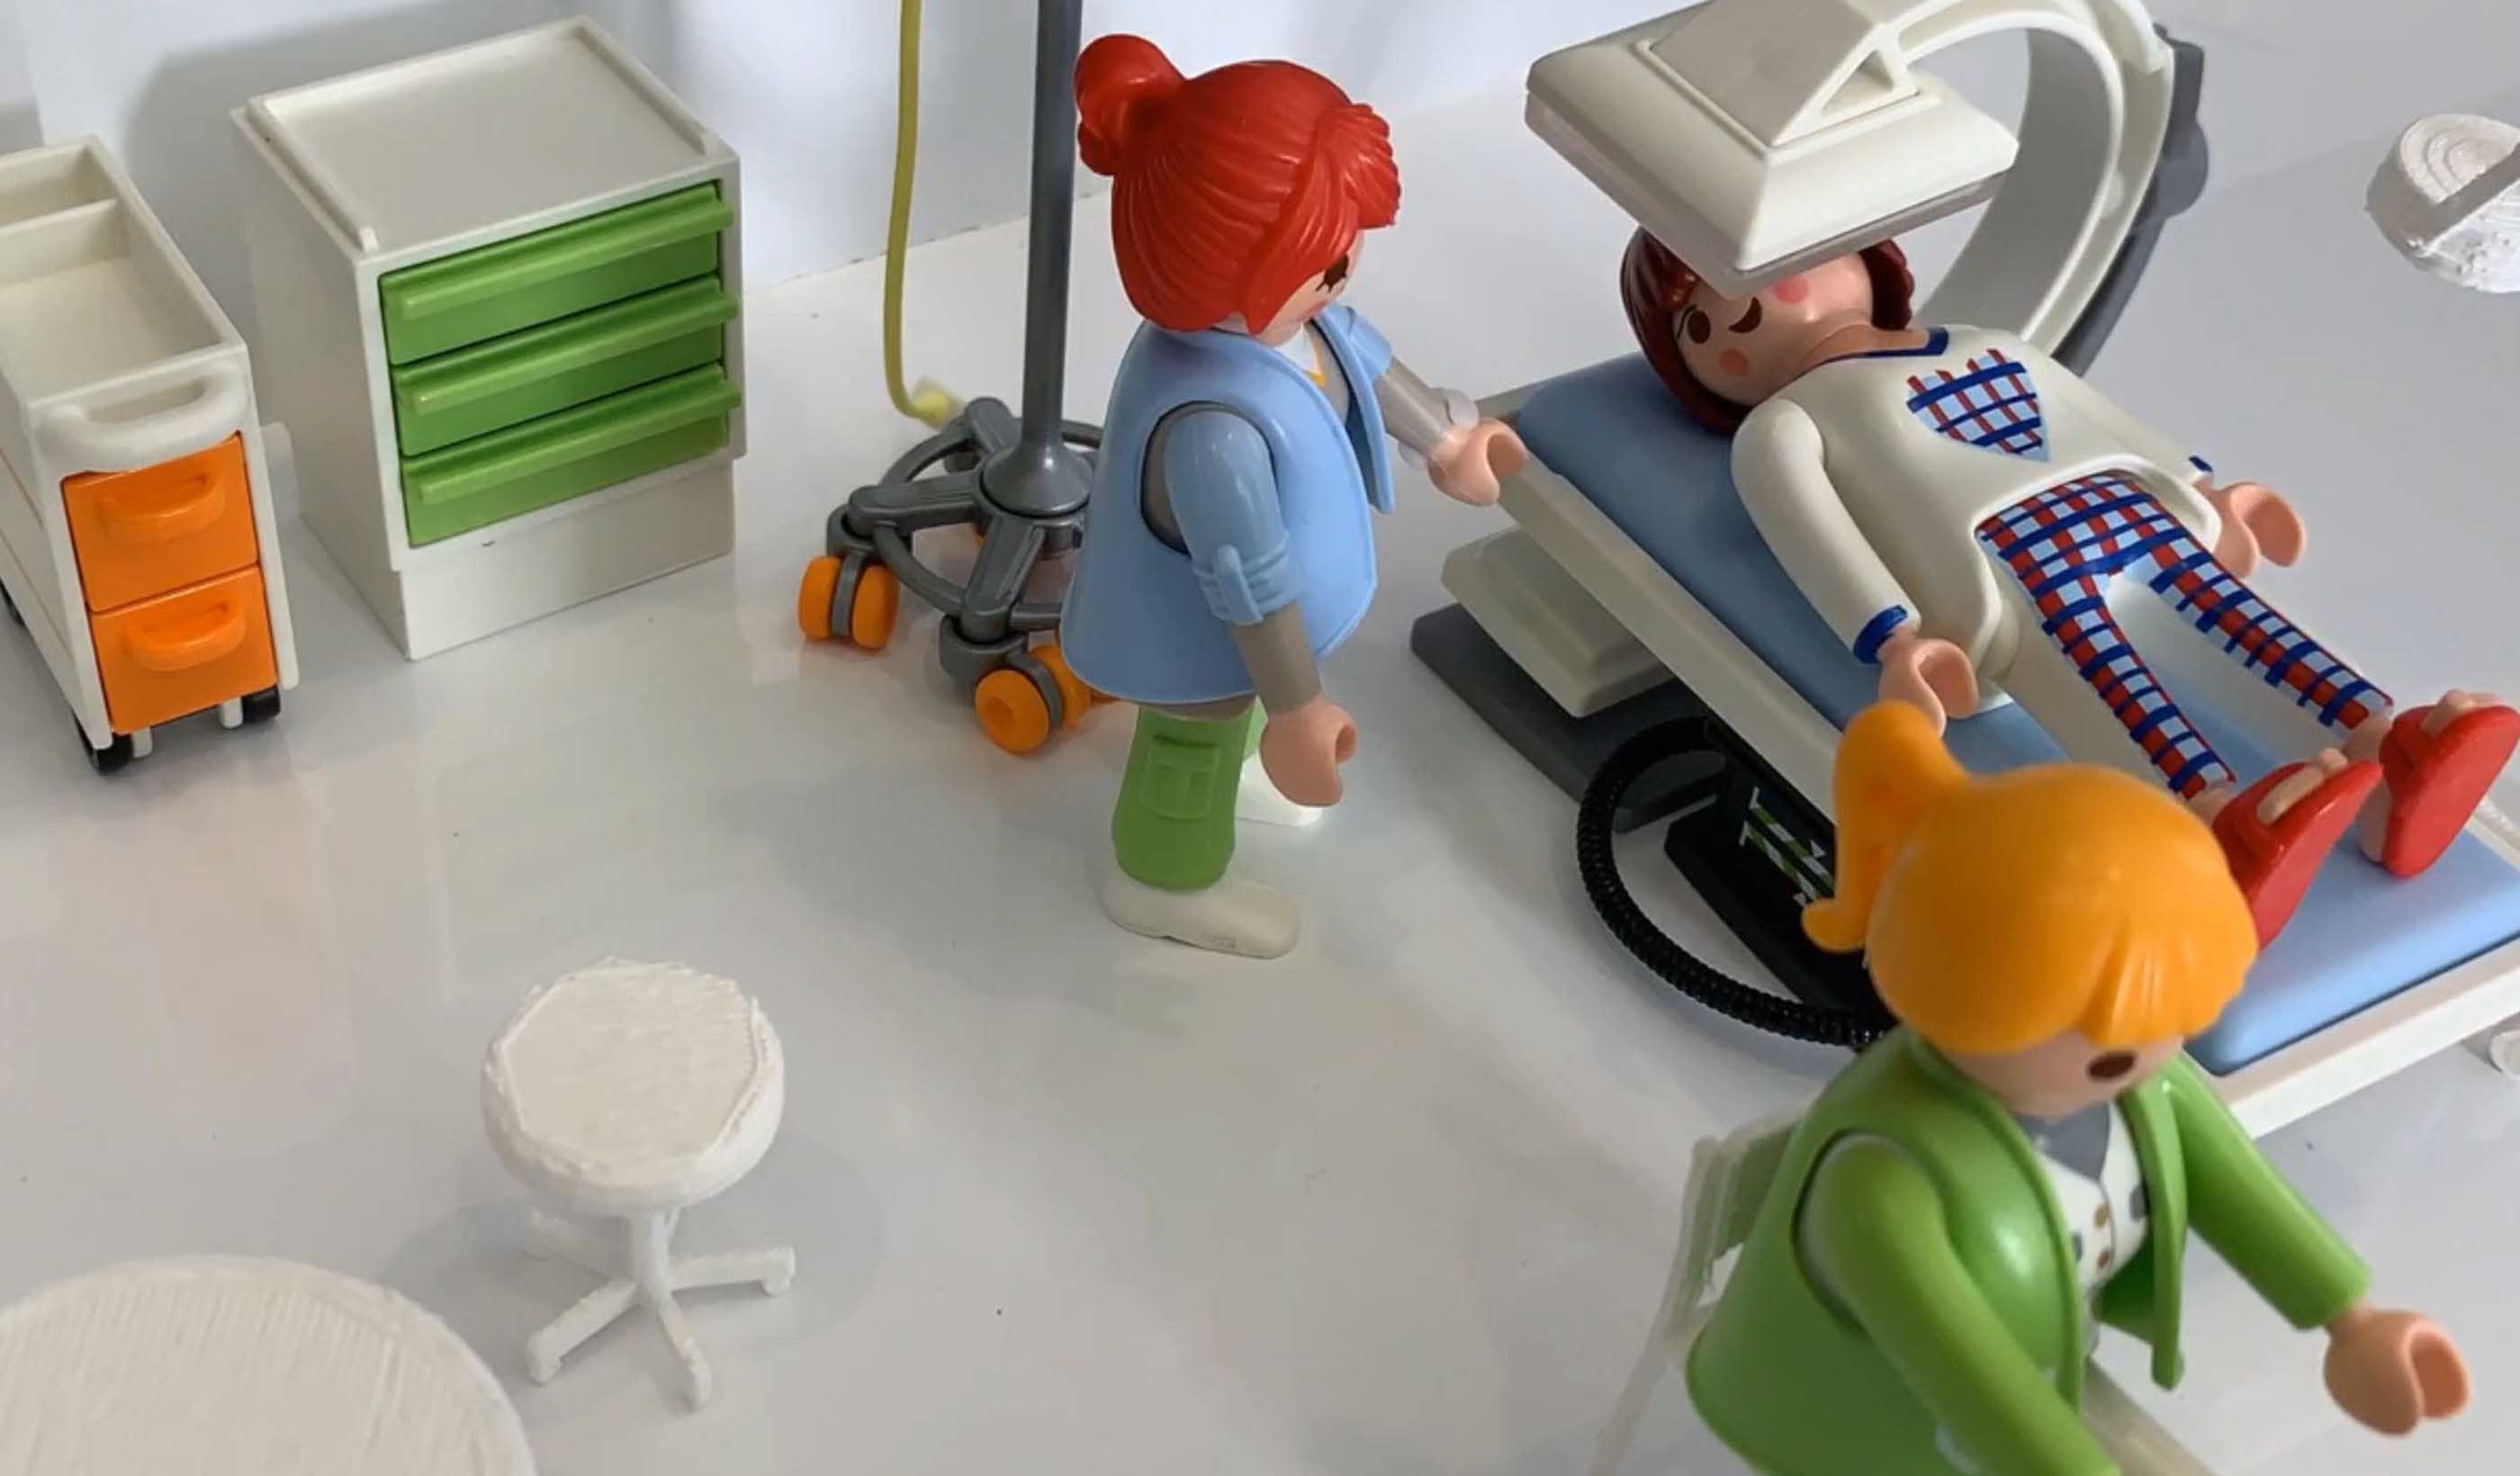 Planning healthcare facilities with Playmobil figures and 3D printers